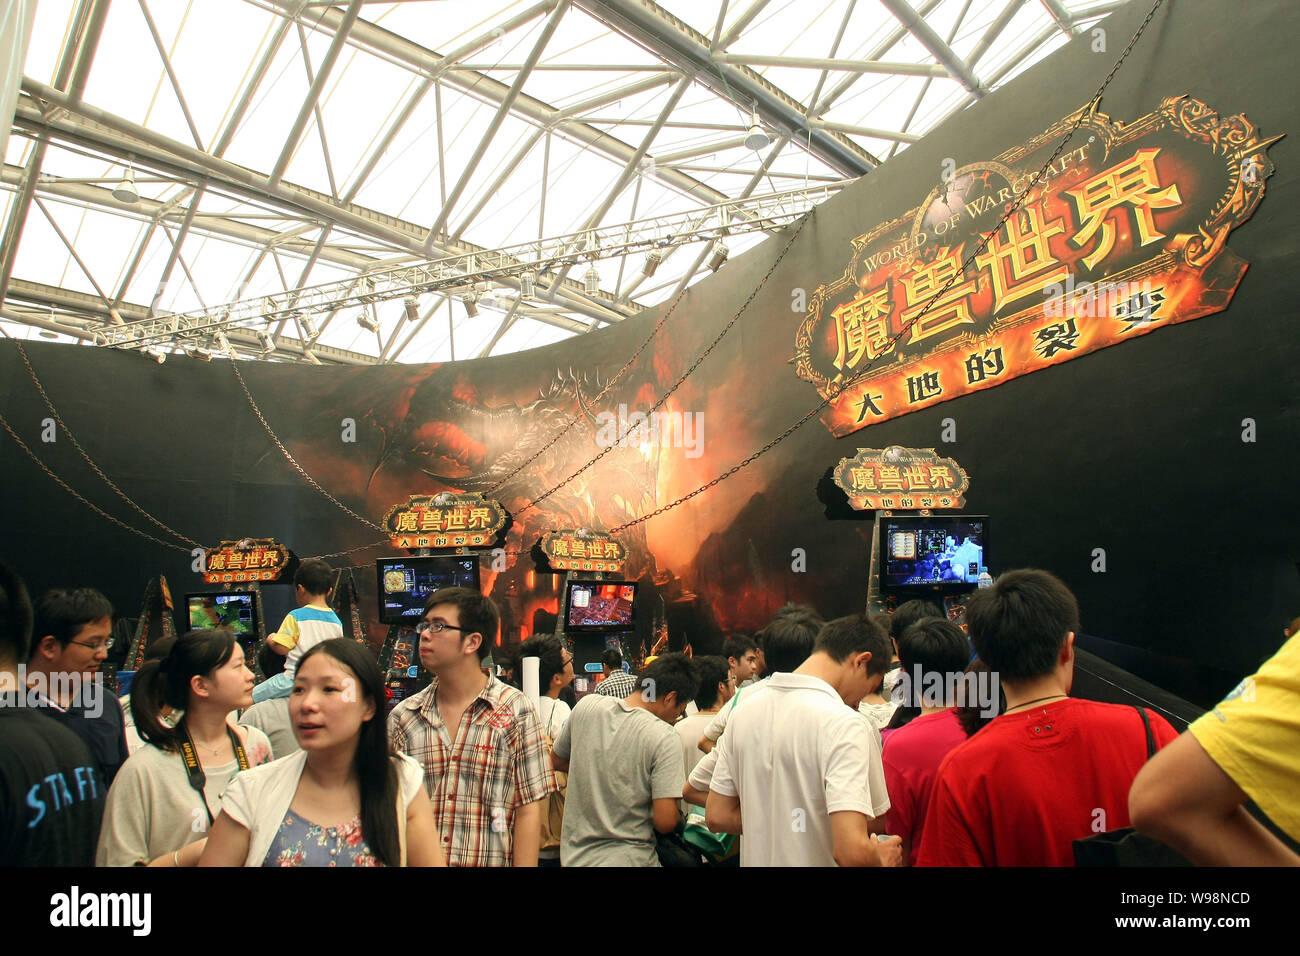 Visitors crowd the booth of World of Warcraft during the 9th China Digital Entertainment Expo & Conference, also known as ChinaJoy 2011, in Shanghai N Stock Photo